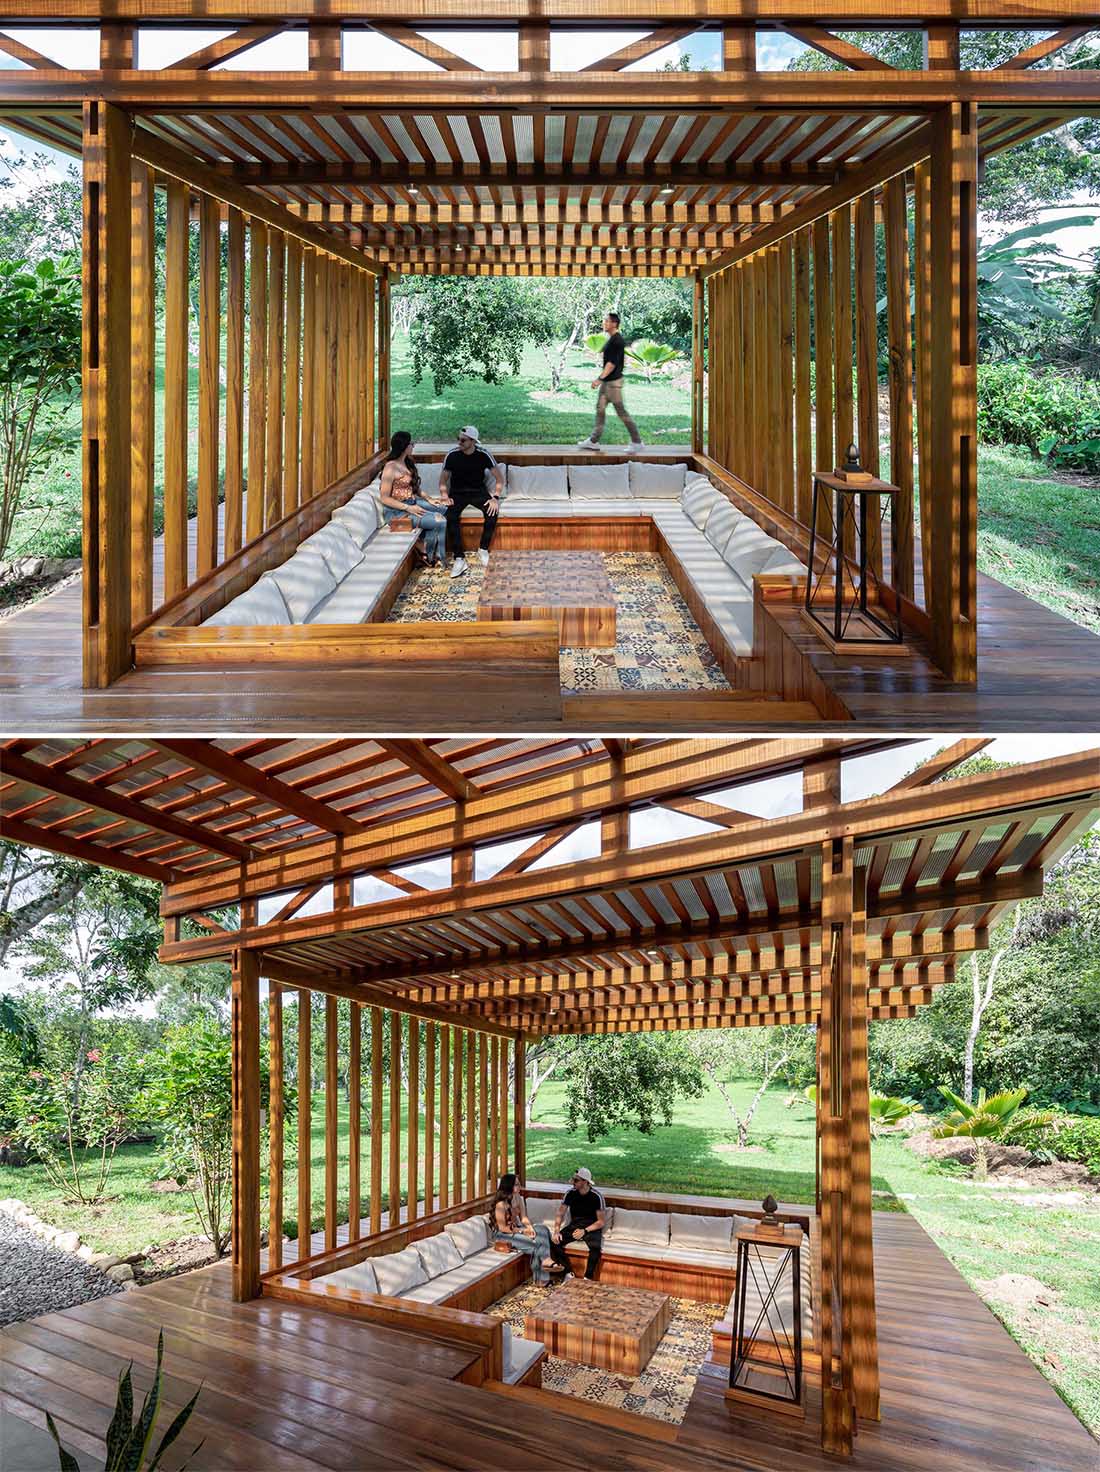 A sunken conversation pit sits underneath a wooden pergola with translucent polycarbonate roofing.